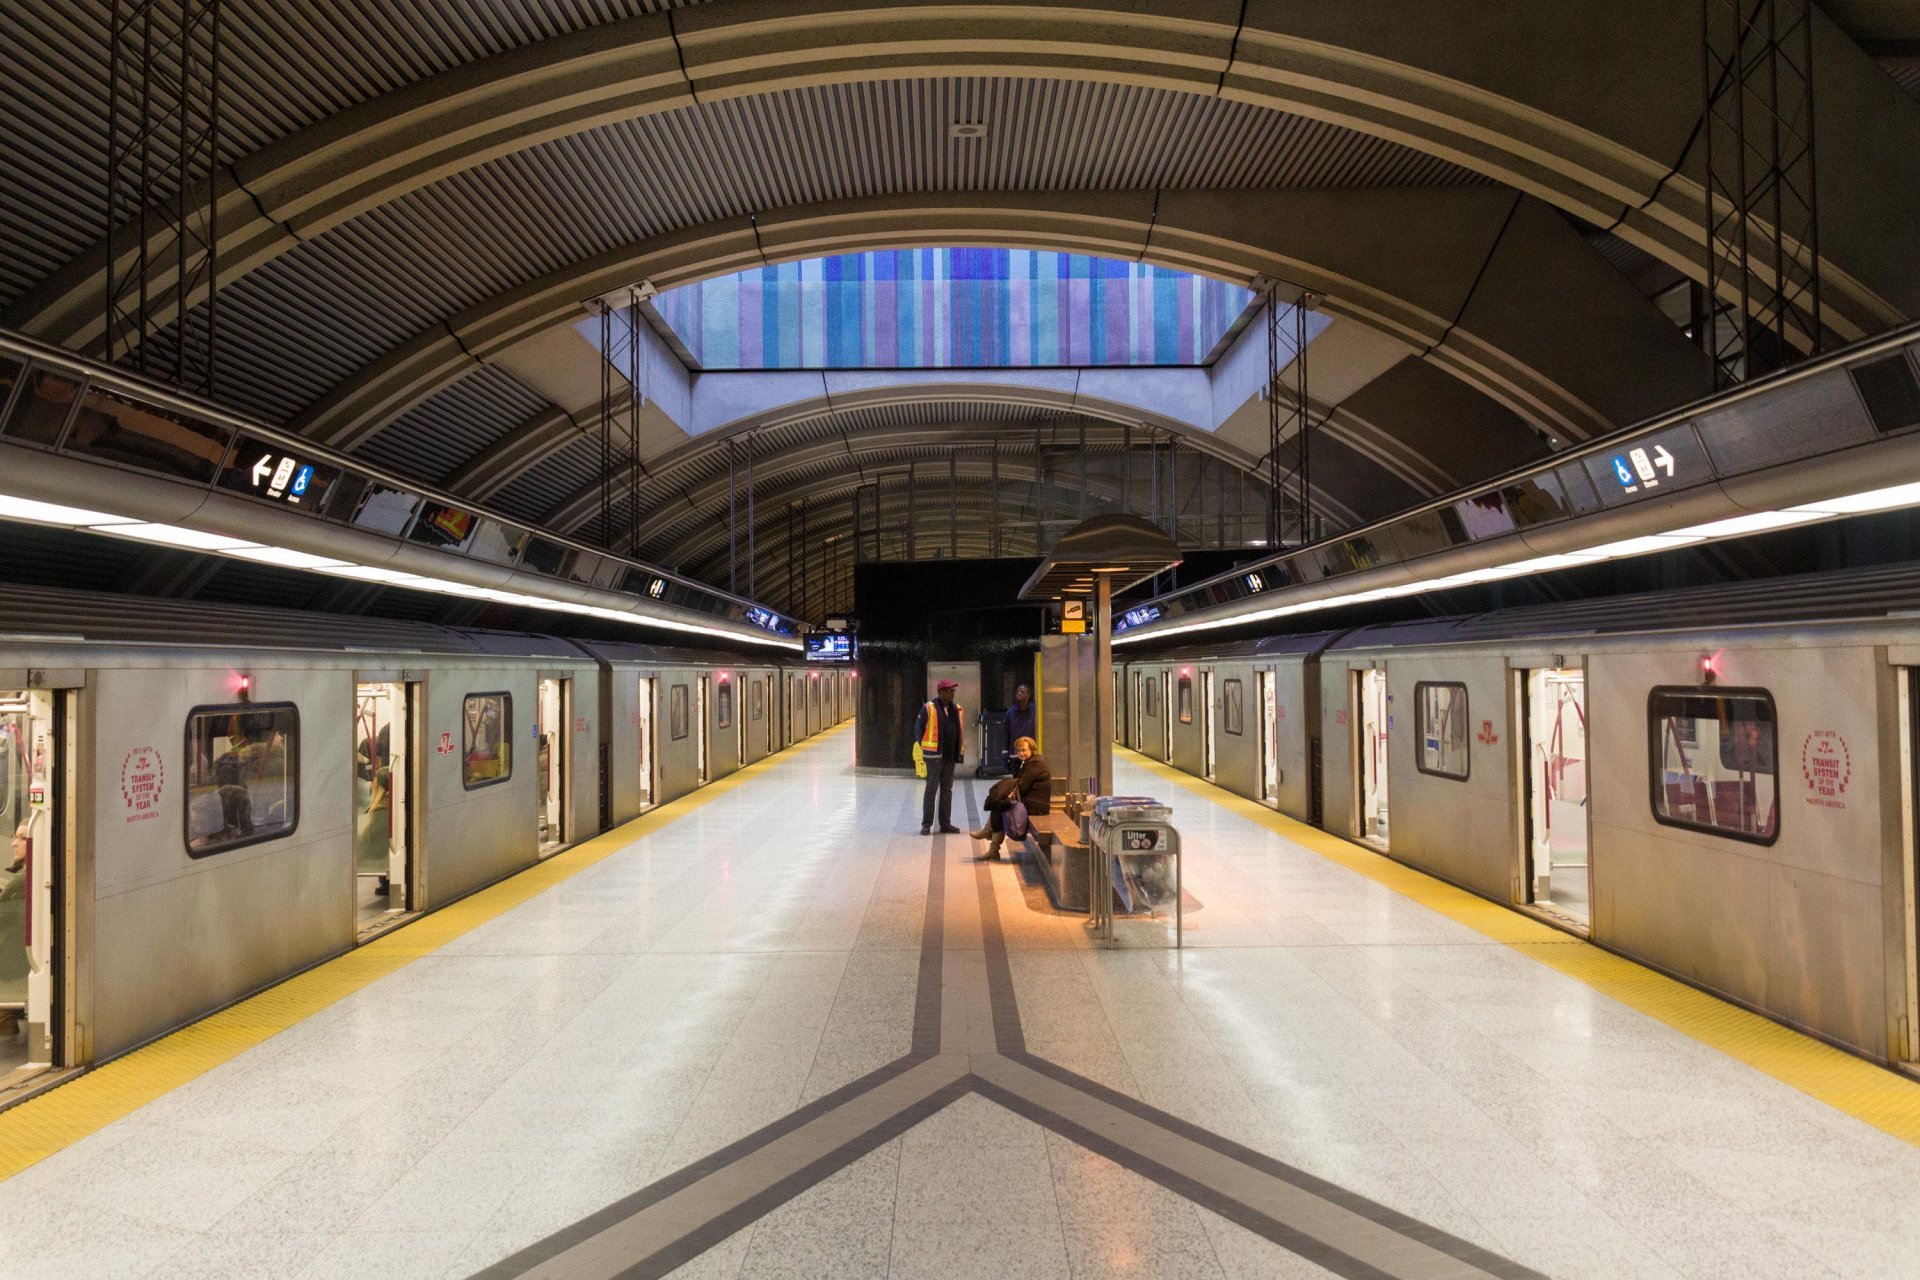 Sheppard West subway station